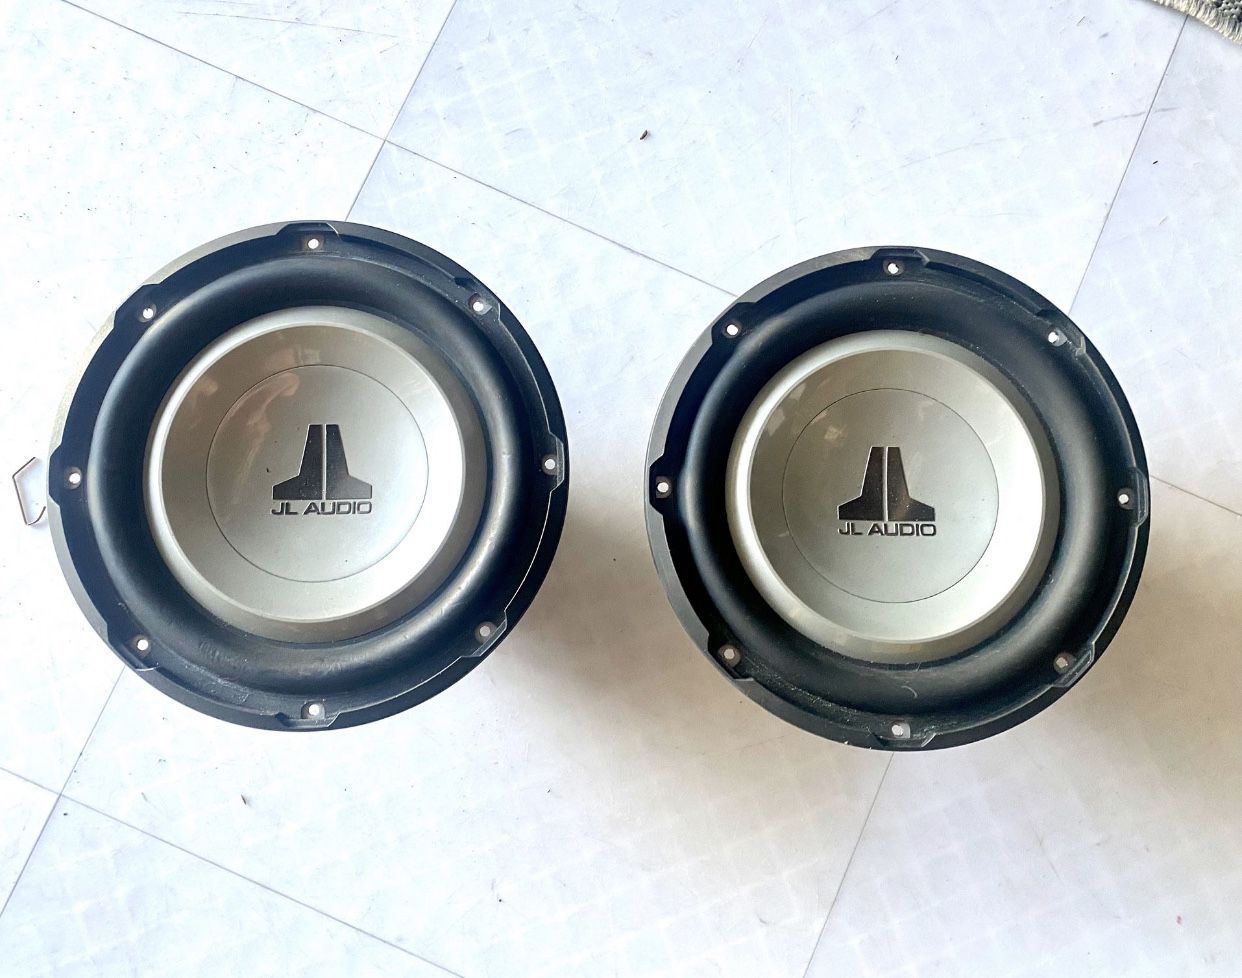 Jl Audio 10w1v2 Subwoofers For Sale In Temple City Ca Offerup